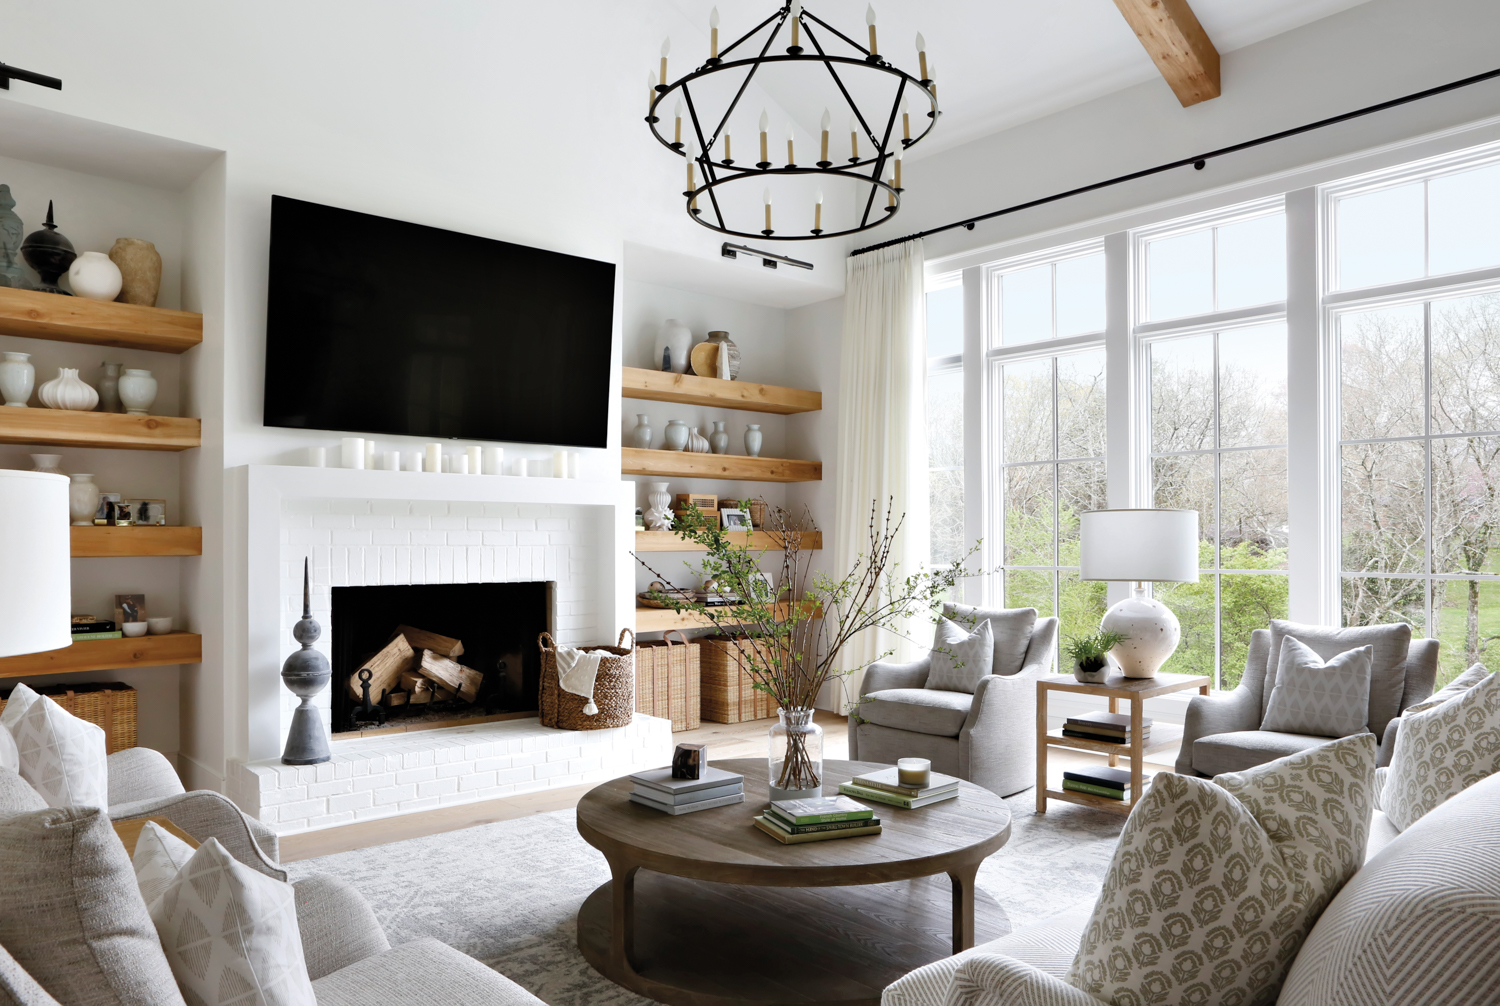 Bright modern farmhouse family room with wooden ceiling beams and a white brick fireplace